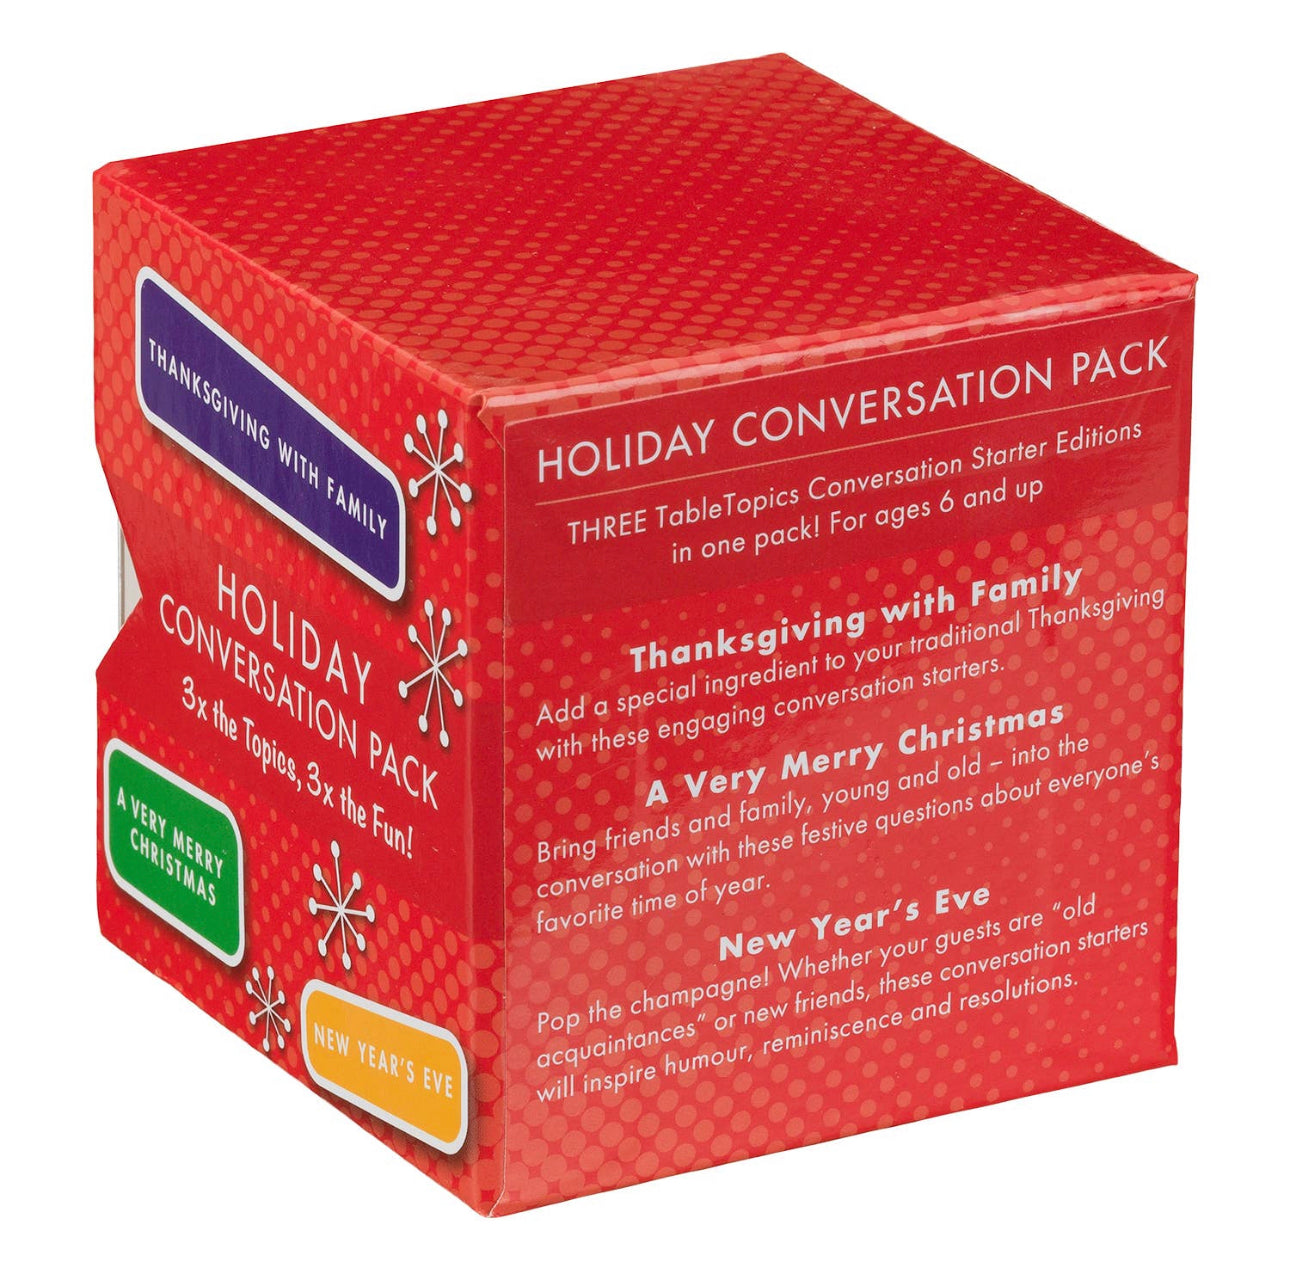 HOLIDAY CONVERSATION PACK GAME